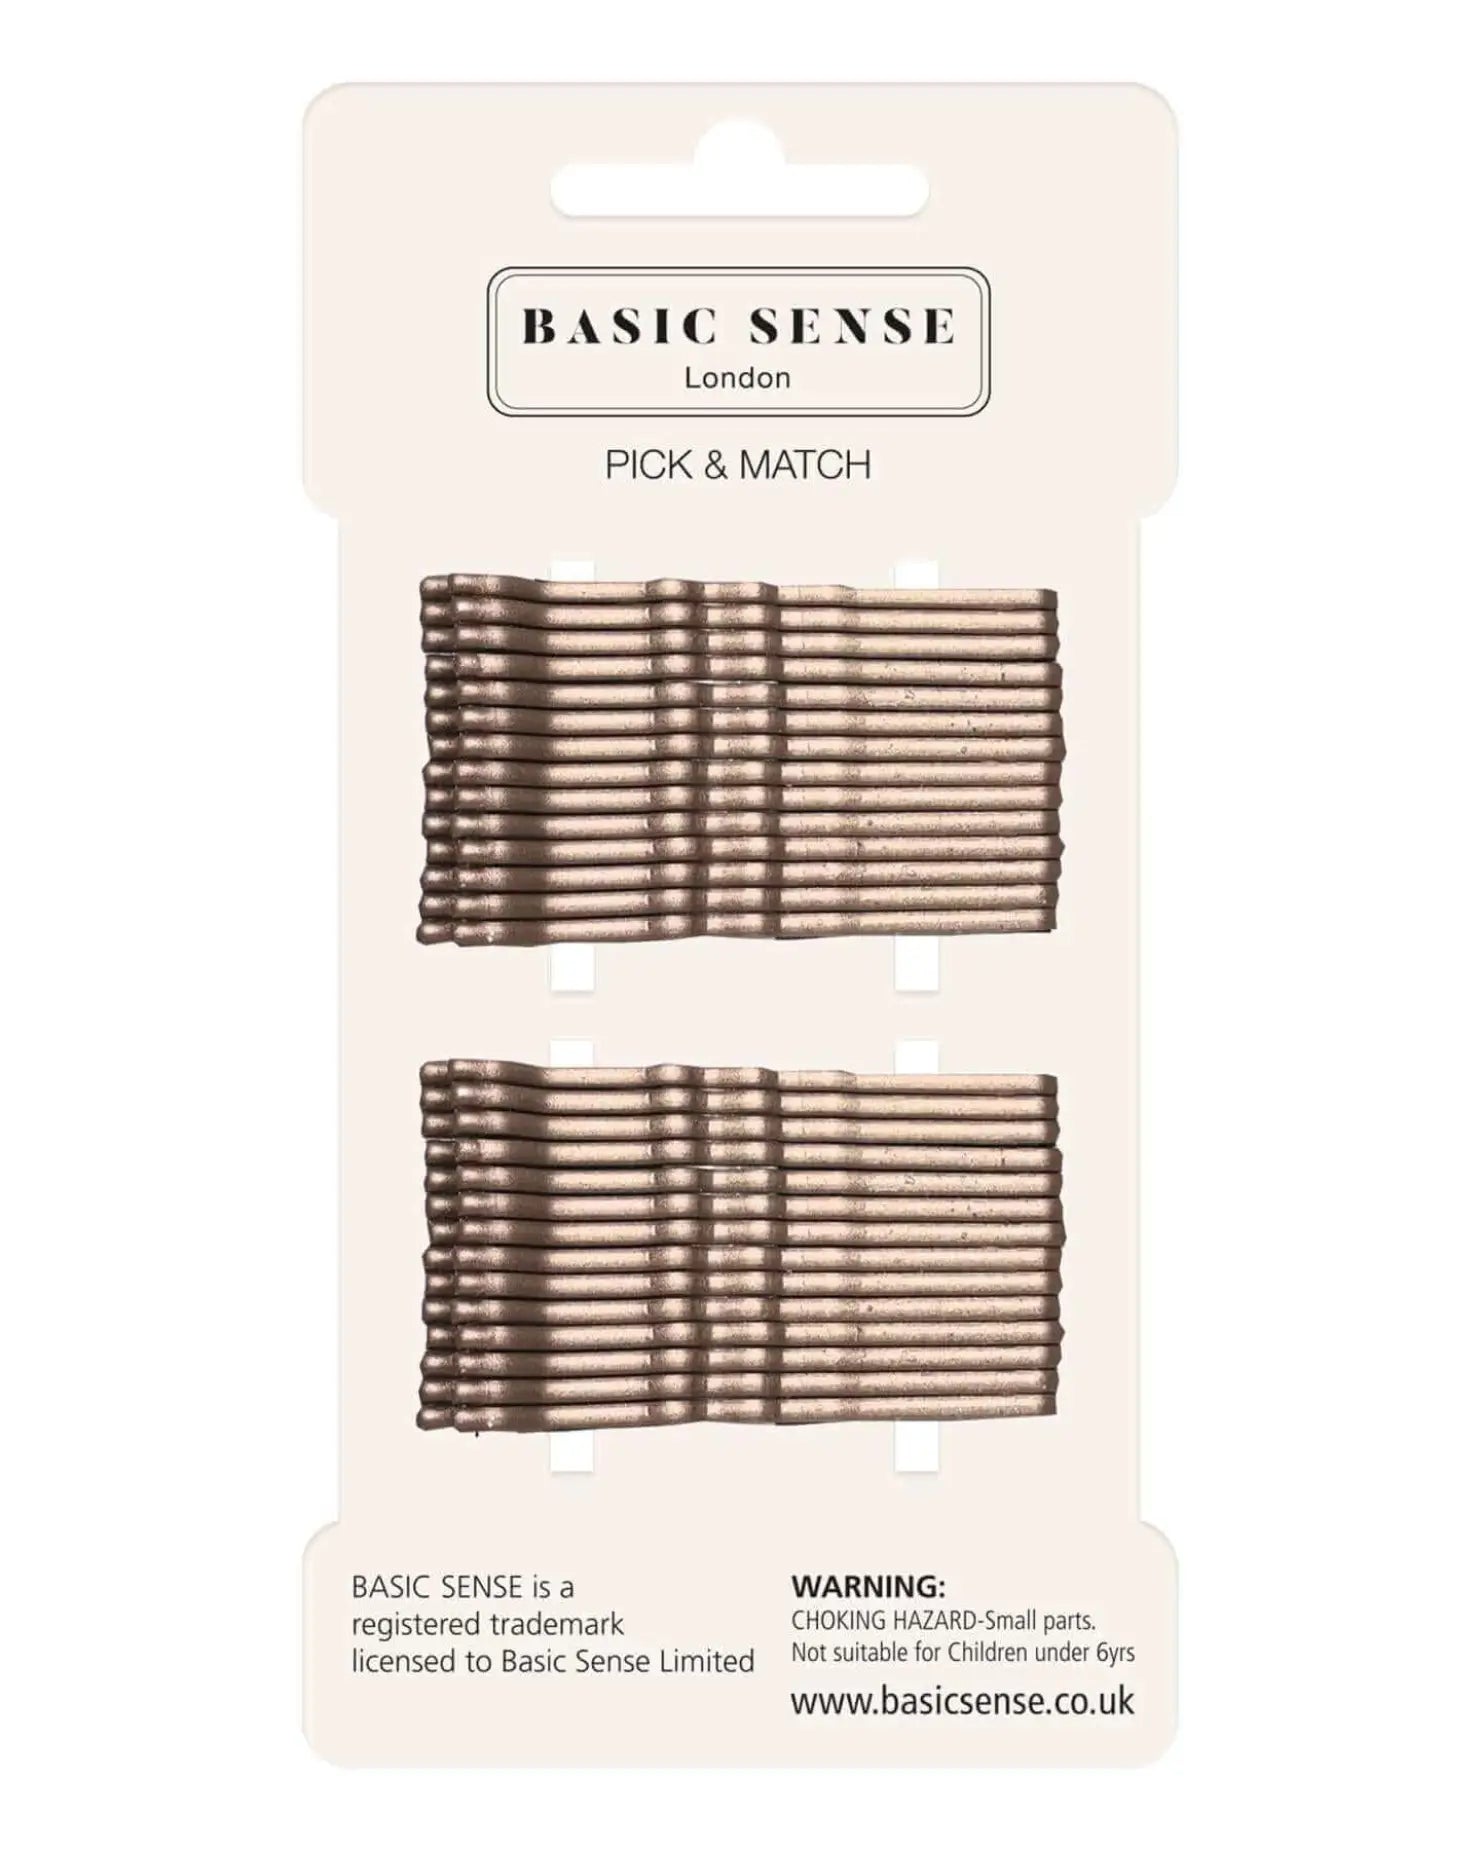 30pcs metal bobby hair pins in package for hold & style.